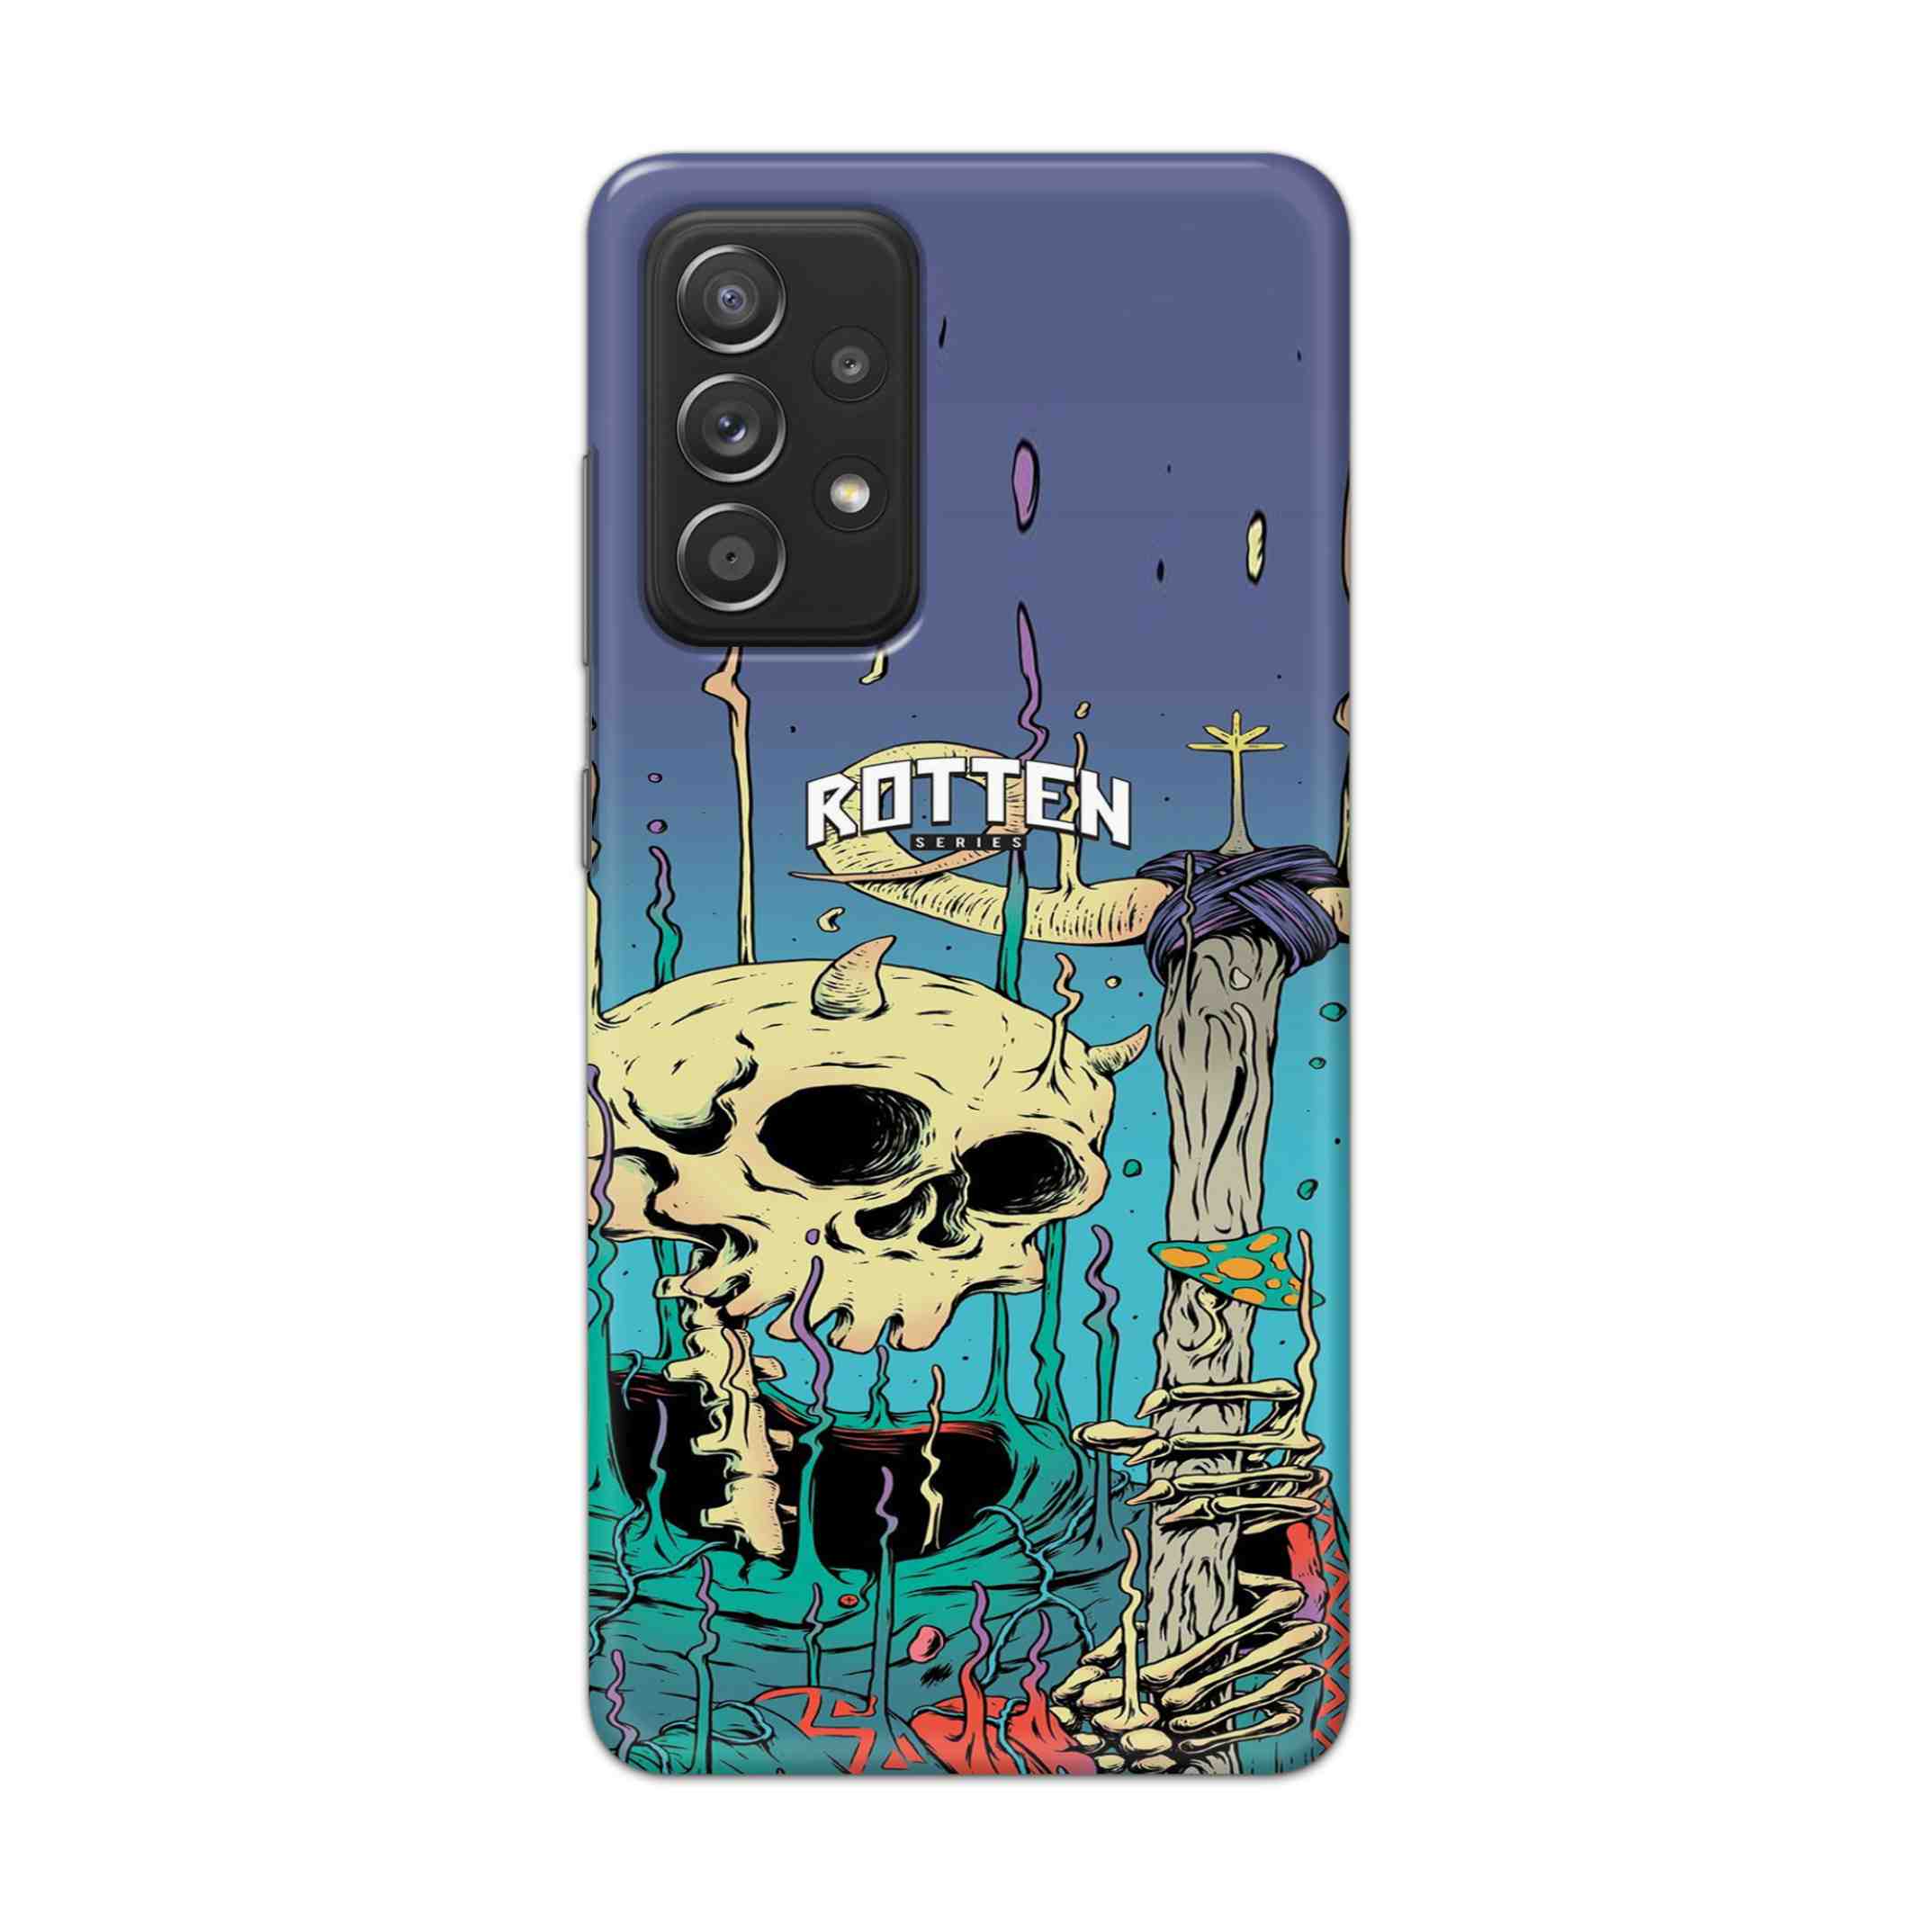 Buy Skull Hard Back Mobile Phone Case Cover For Samsung Galaxy A52 Online